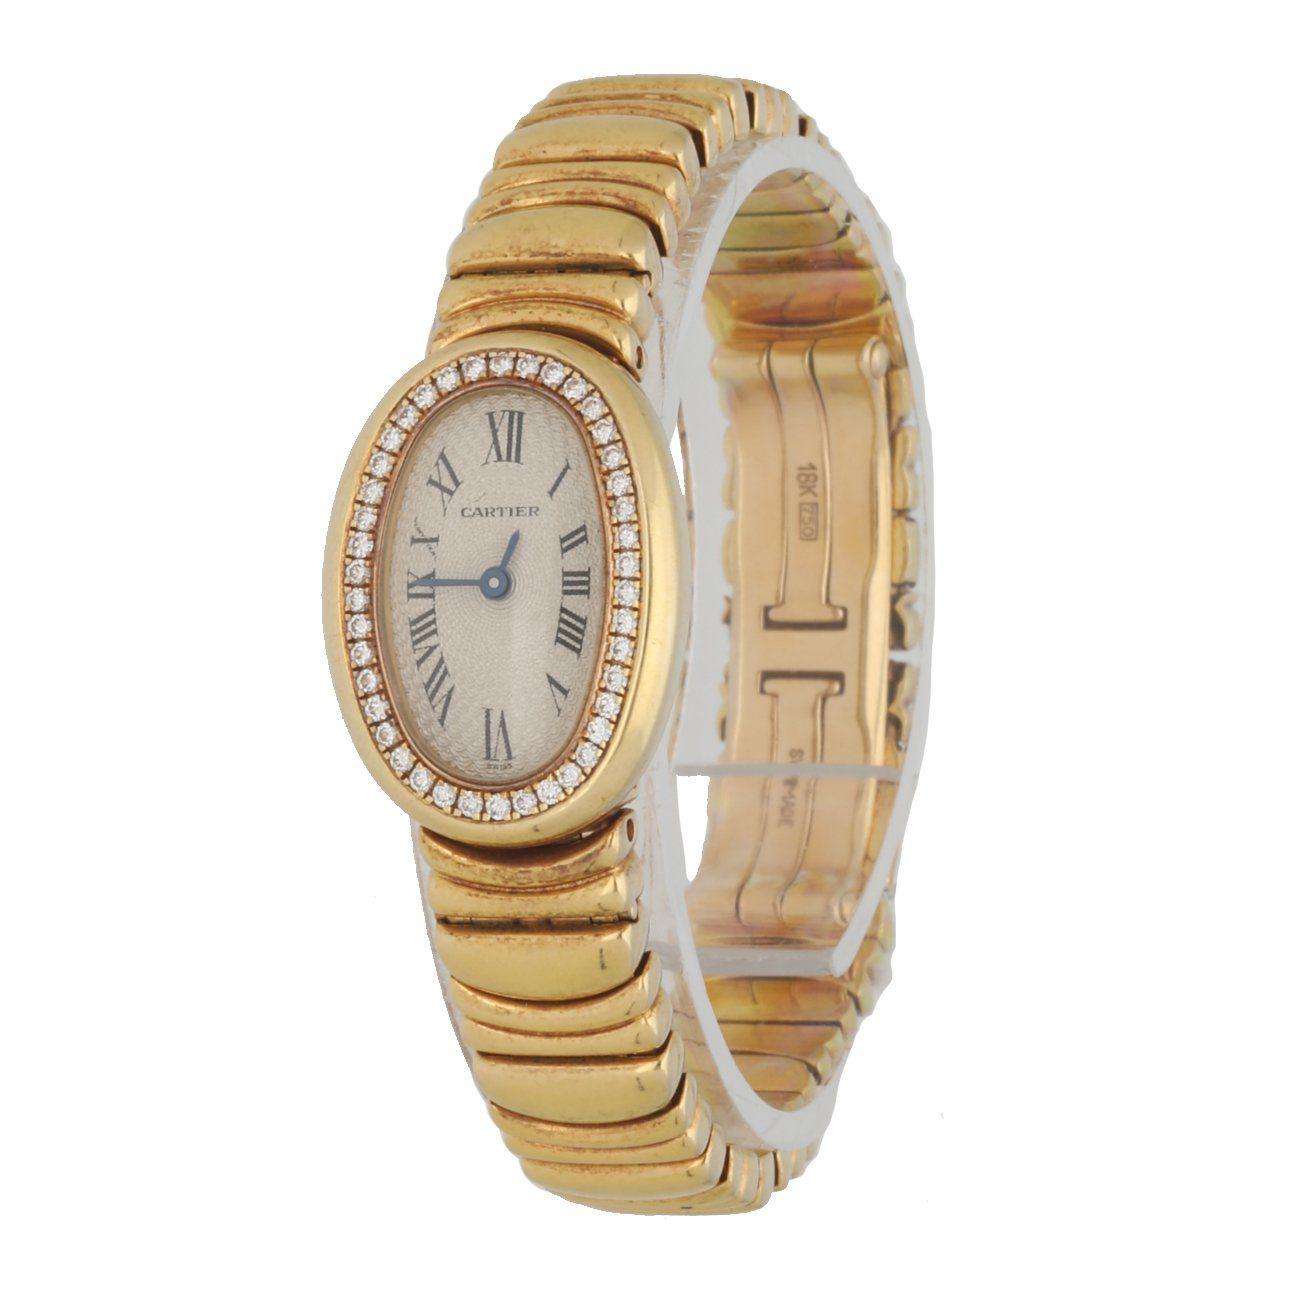 Cartier Baignoire 1960 ladies watch. 22mm 18k Yellow Gold case withÂ 18K Yellow Gold bezel & factory diamonds set. Off-White dial withÂ Blue hands andÂ Black Roman numeral hour markers. 18K Yellow Gold Bracelet with 18K yellow gold Butterfly Clasp.